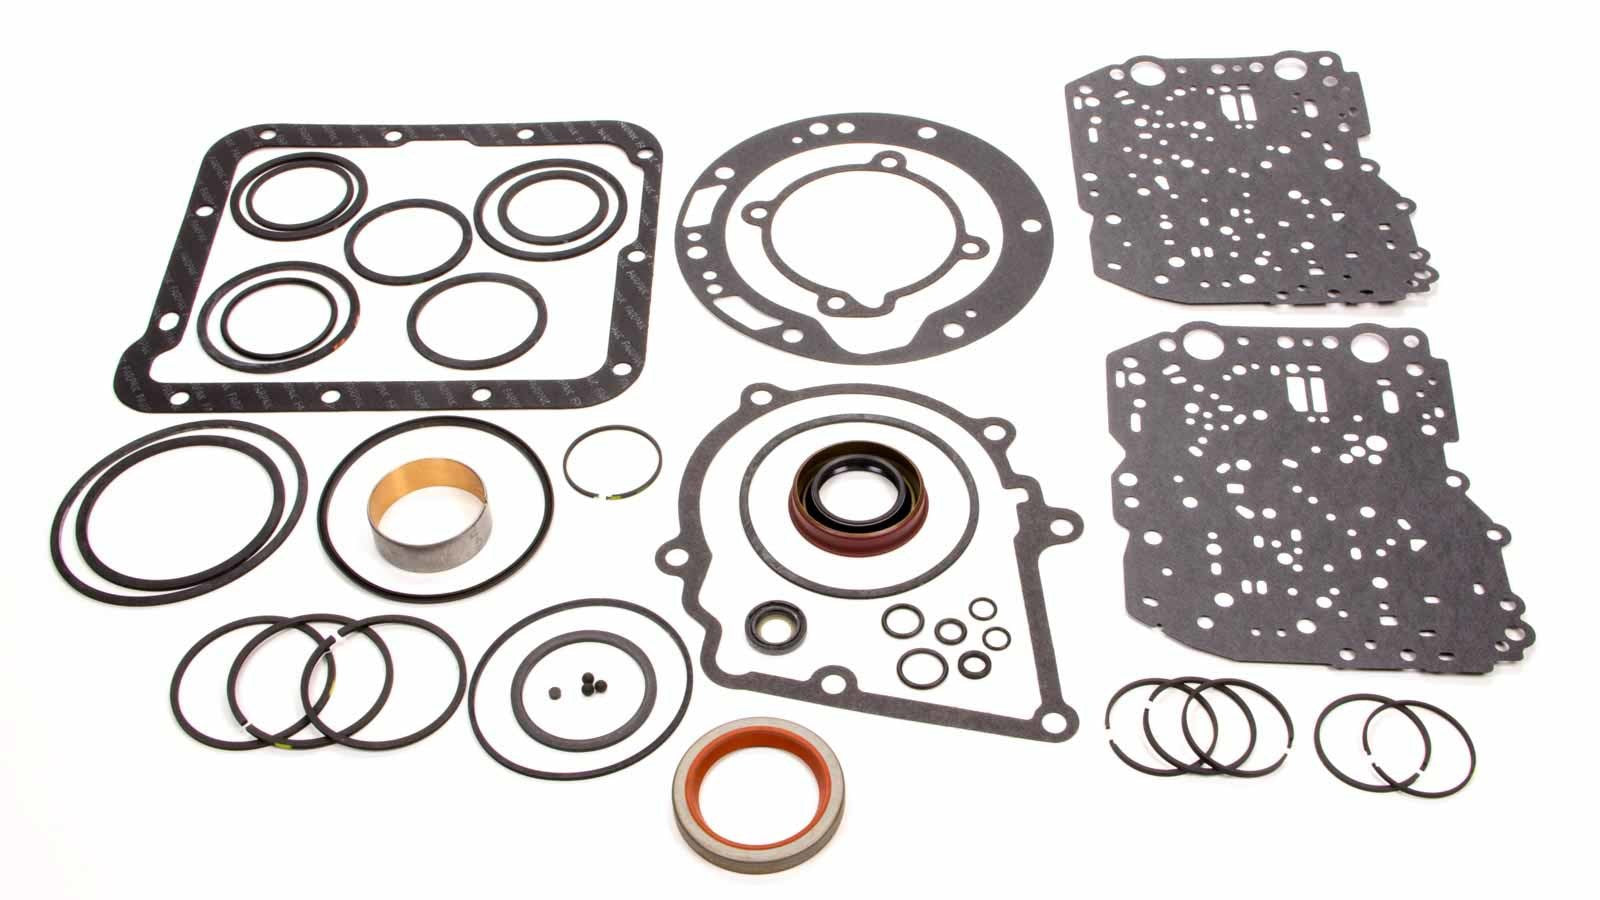 TCI Auto Trans Racing Overhaul Kit Ford C-4 70-Up Automatic Transmissions and Components Automatic Transmission Rebuild Kits main image